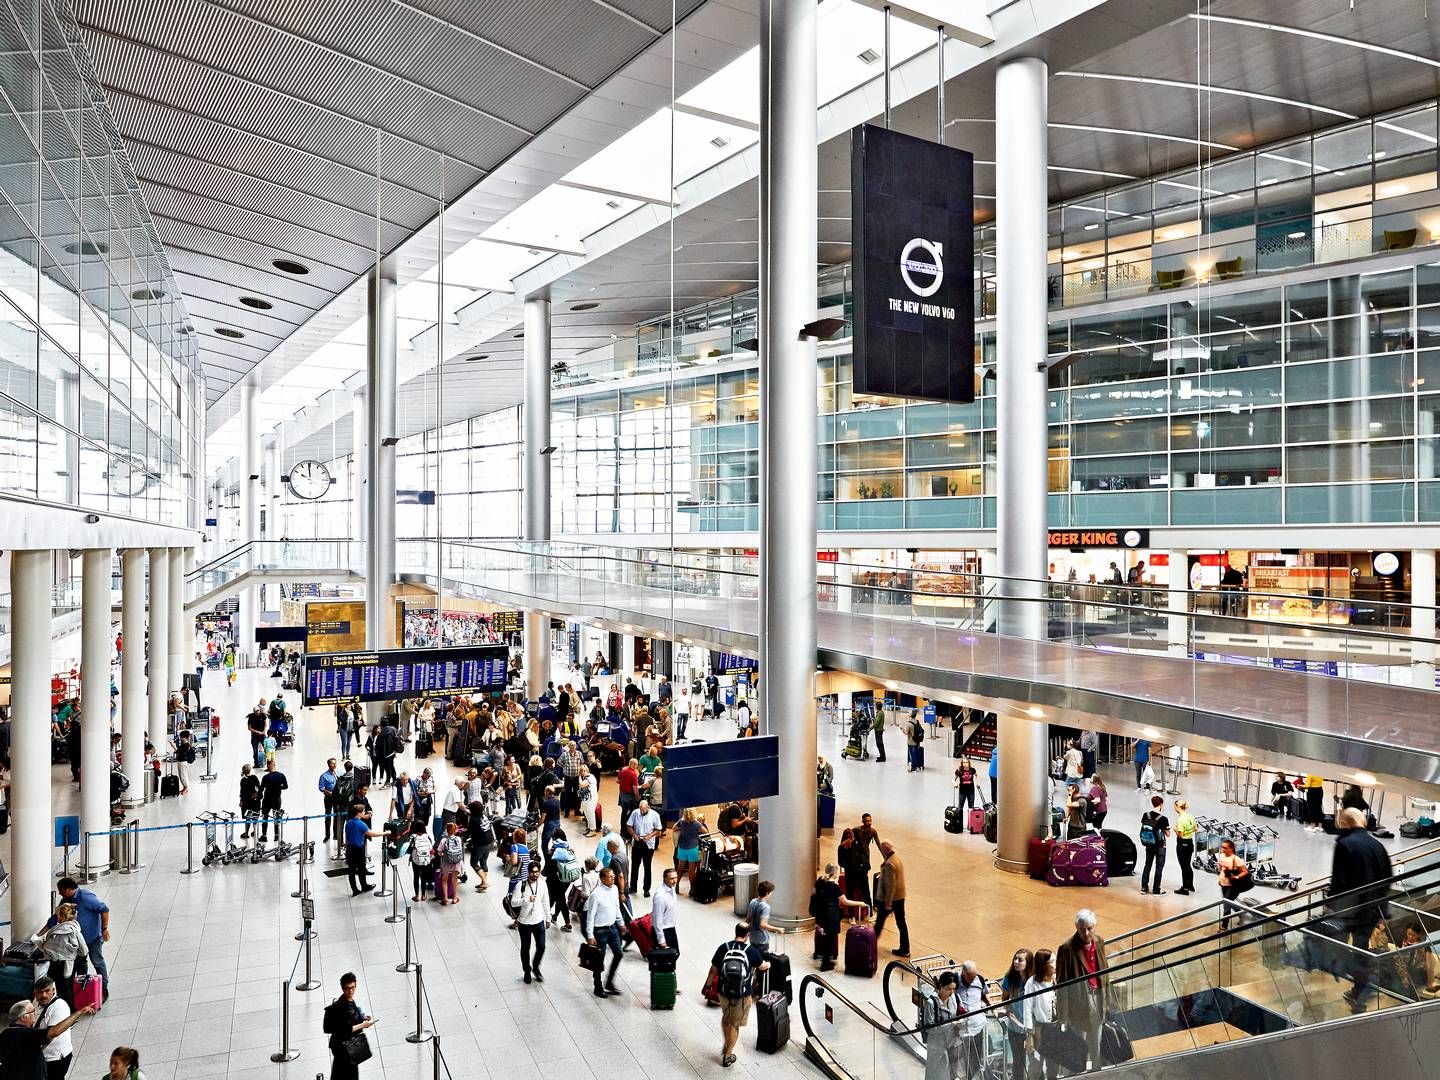 During its ownership in Copenhagen Airports, Australian private equity fund Macquarie moved DKK billions out of Denmark without paying taxes. Now, ATP and Canadian Ontario Teachers Pension Plan are footing the bill. | Photo: Pr / Københavns Lufthavn